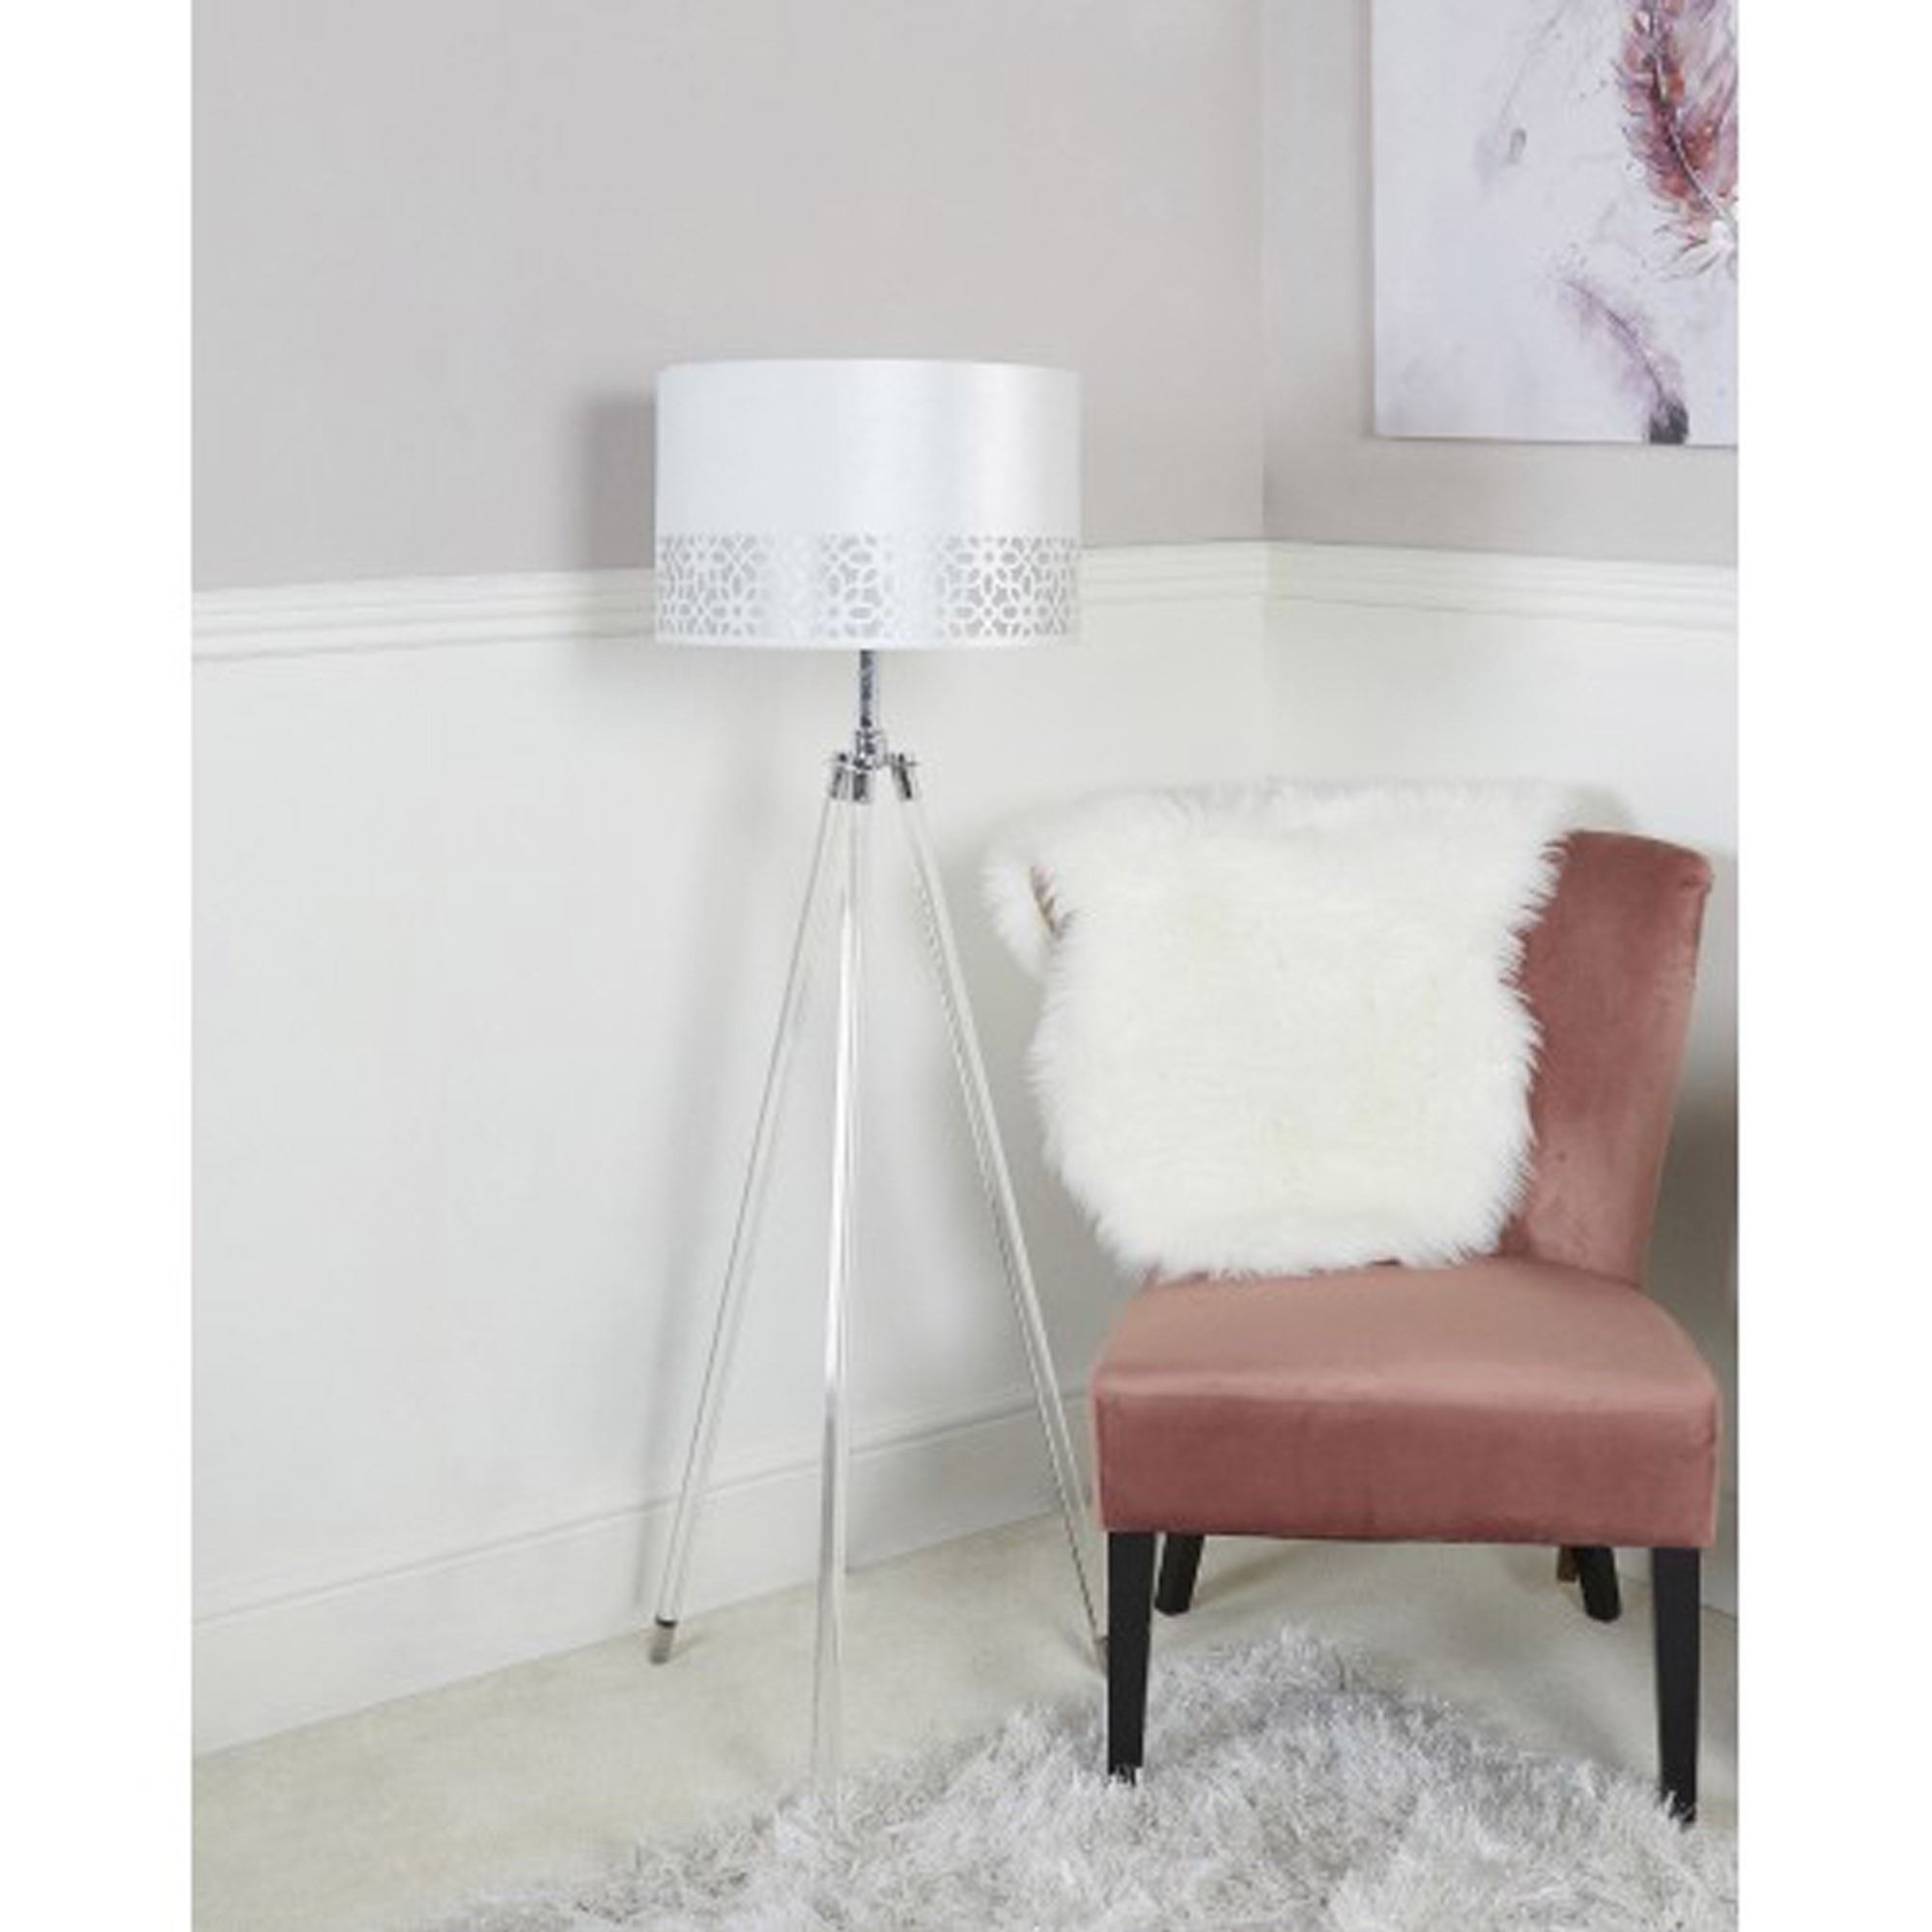 Acrylic Tripod Floor Lamp With White & Silver Shade | Floor Lamps Intended For Acrylic Floor Lamps (View 11 of 20)